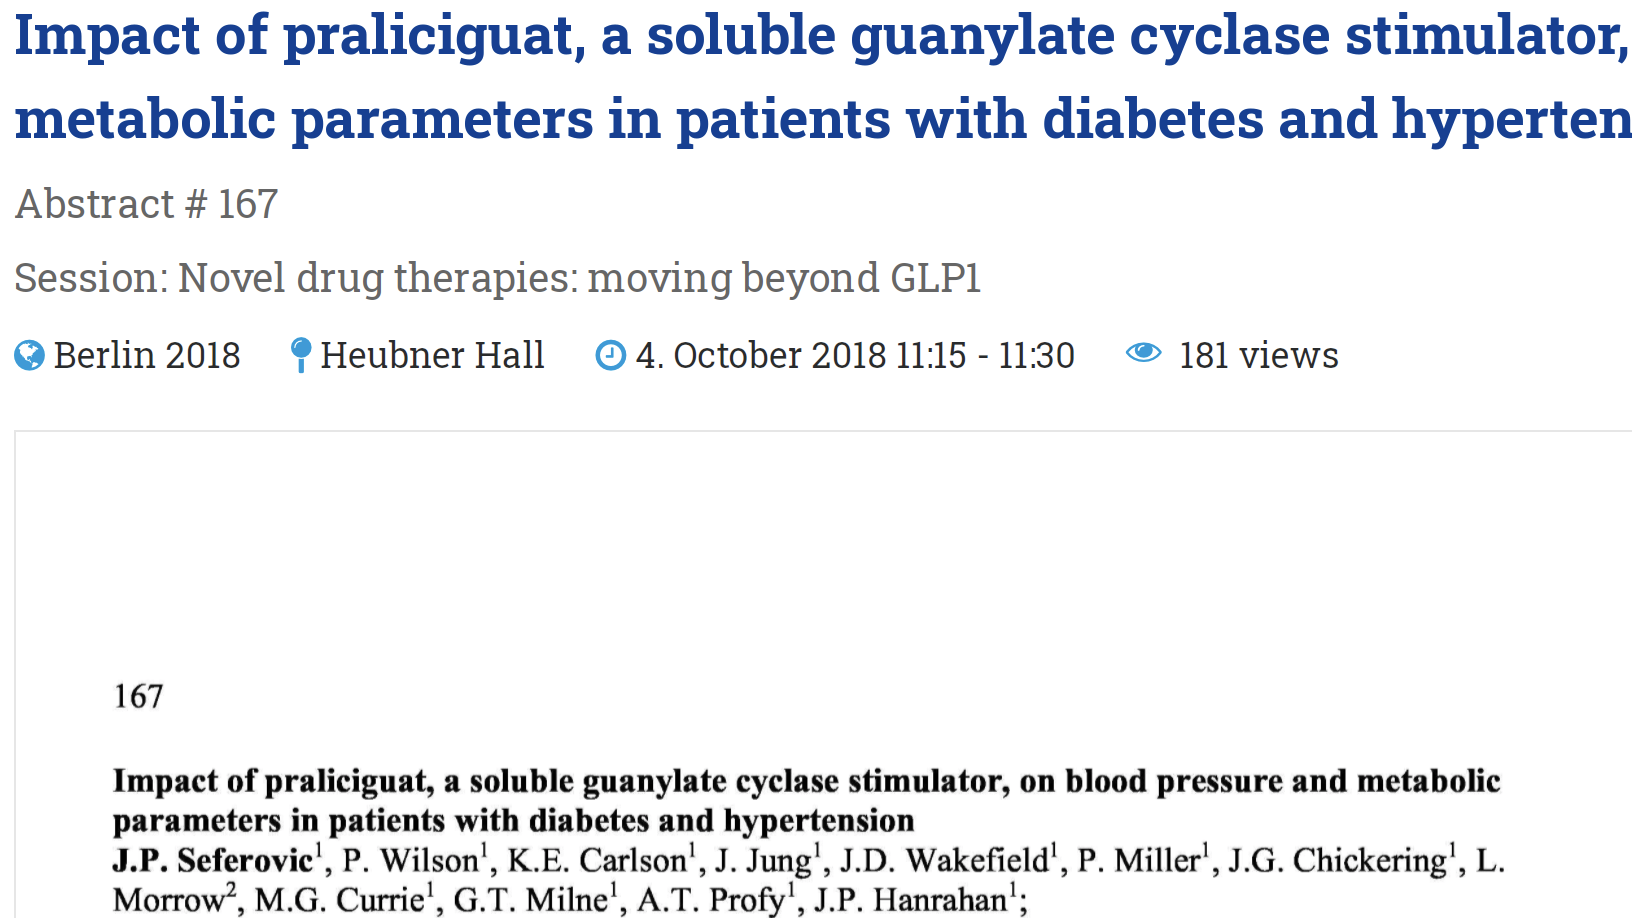 Impact of praliciguat, a soluble guanylate cyclase stimulator, on blood pressure and metabolic parameters in patients with diabetes and hypertension thumbnail